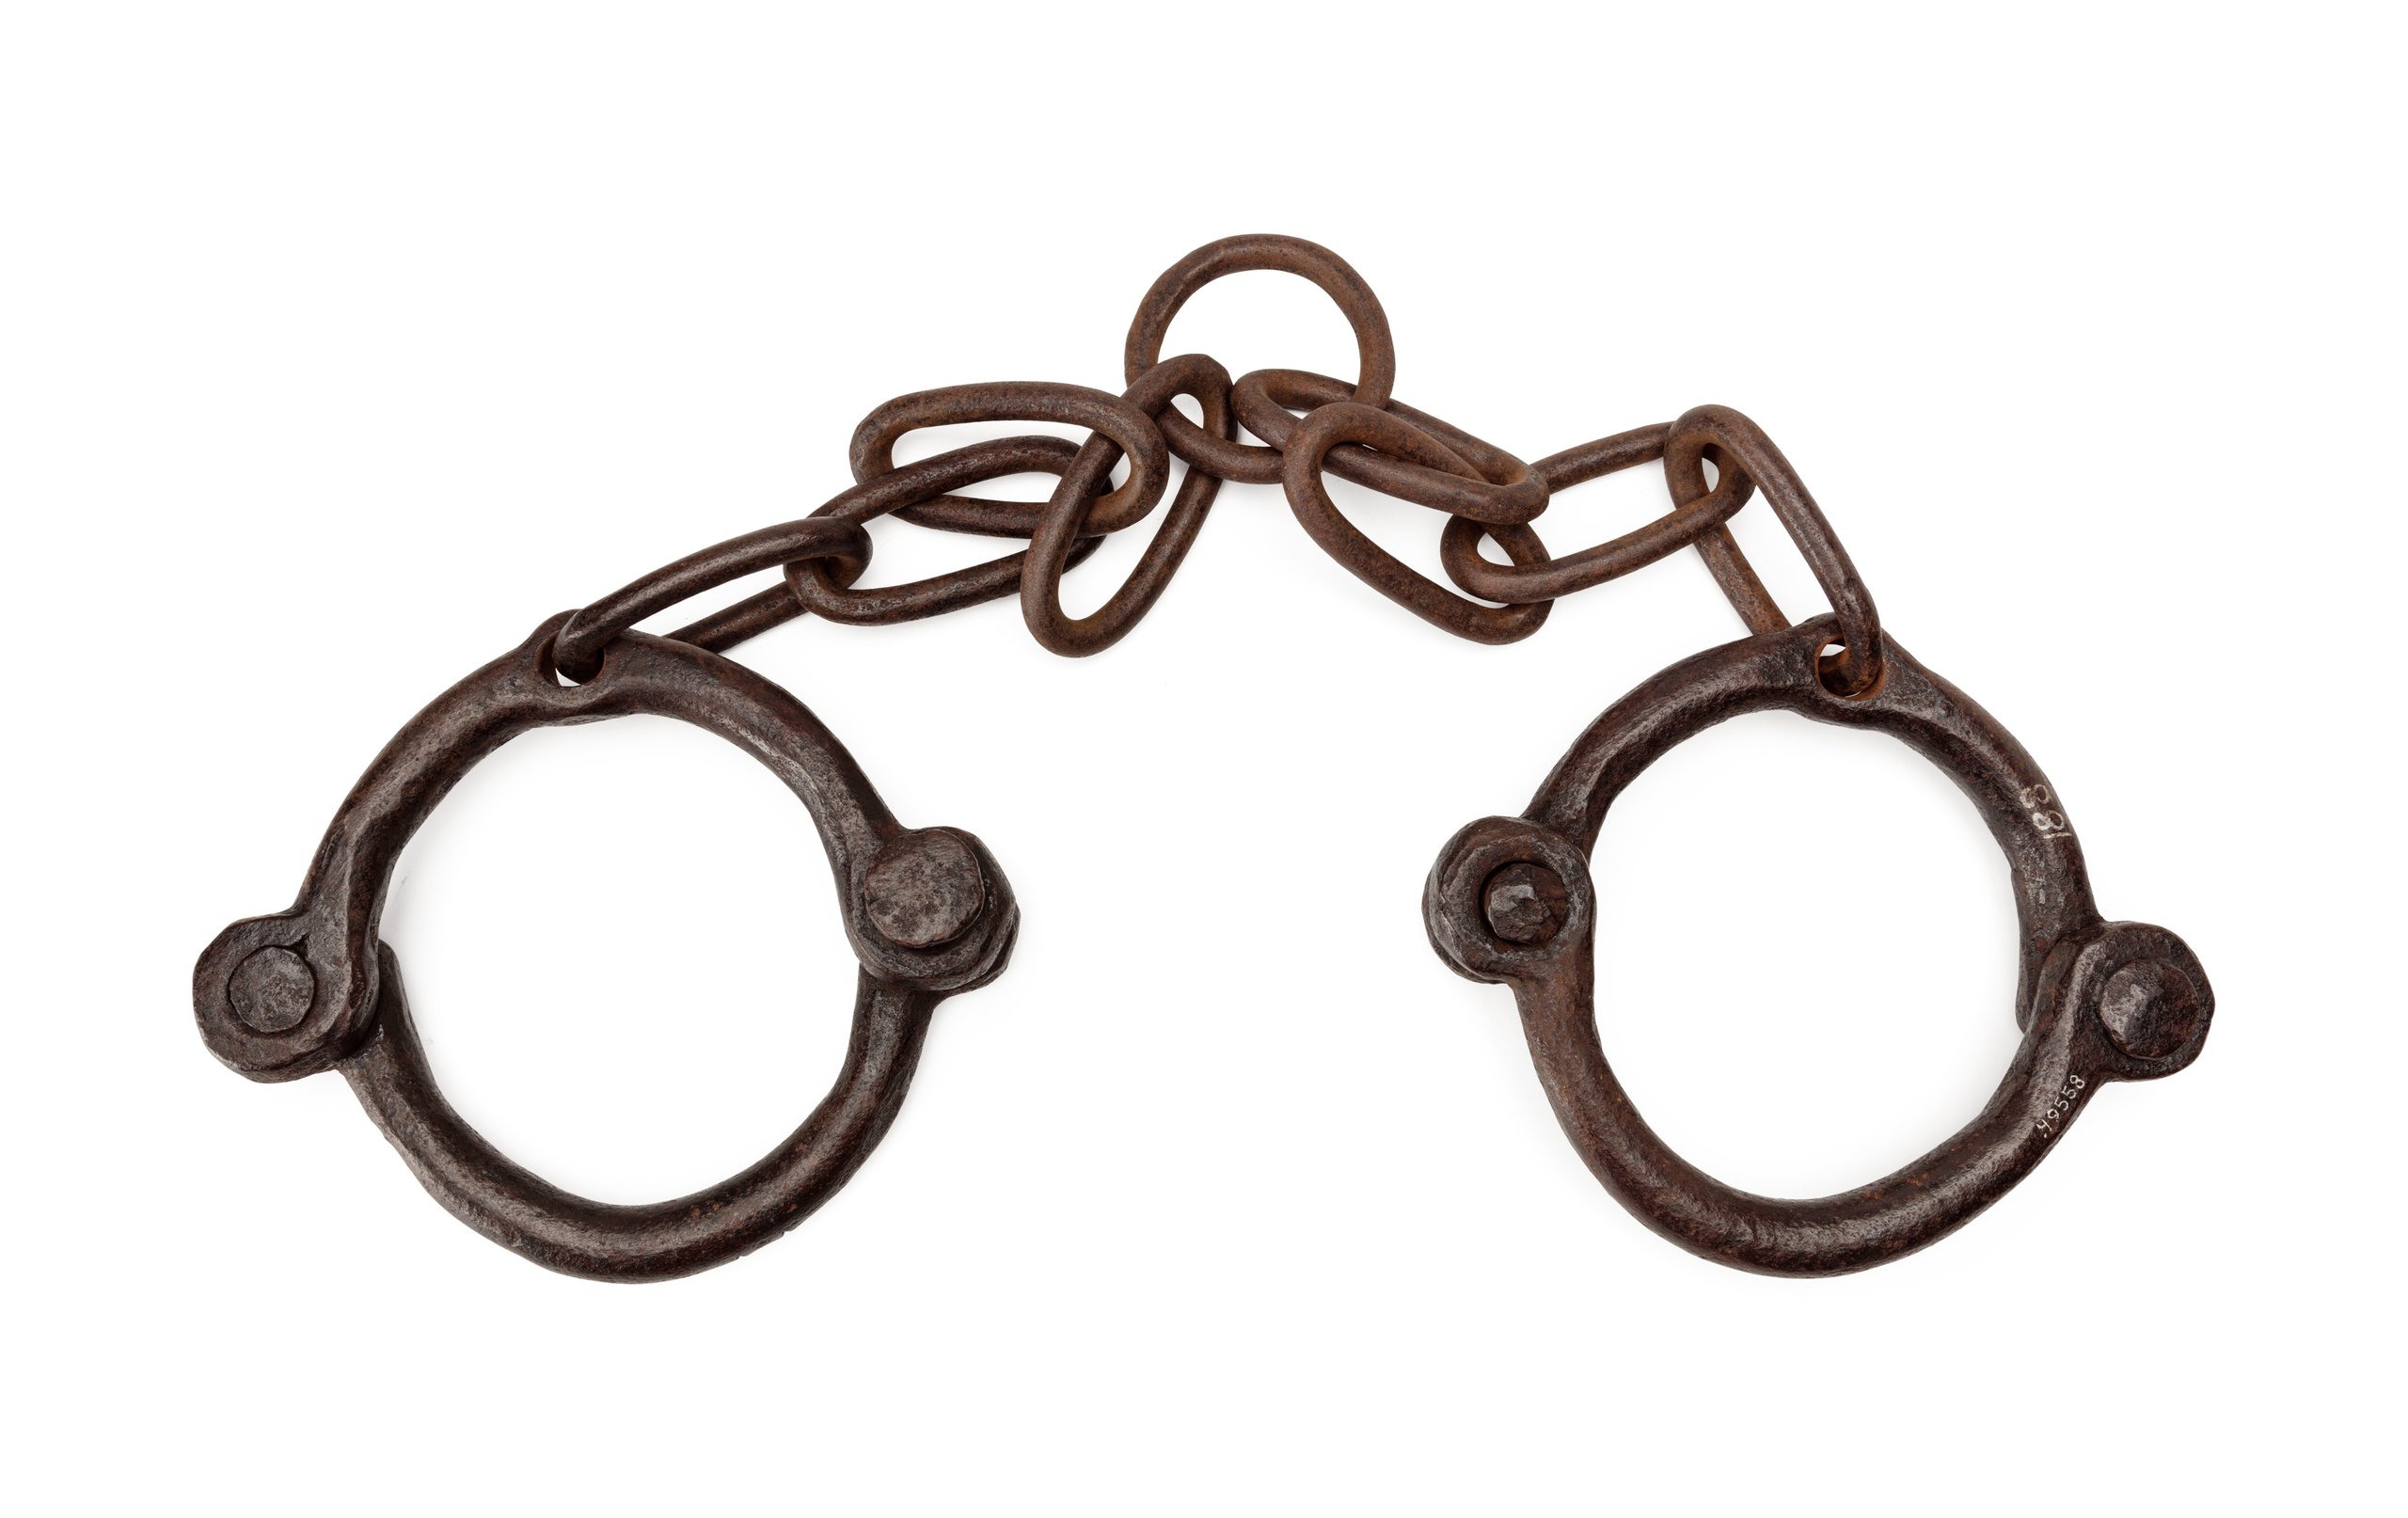 Hand-forged leg manacles